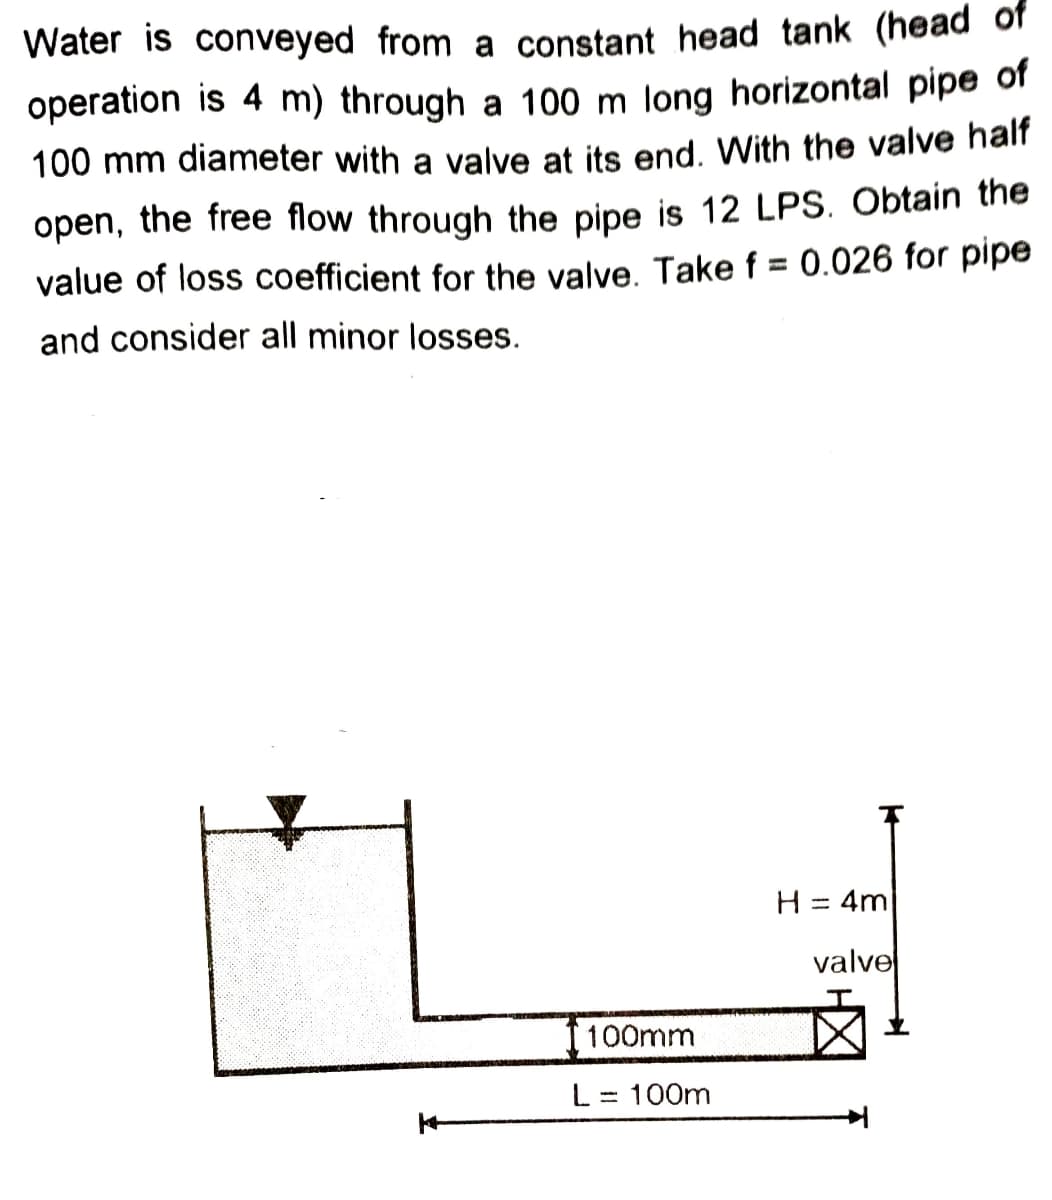 Water is conveyed from a constant head tank (head of
operation is 4 m) through a 100 m long horizontal pipe of
100 mm diameter with a valve at its end. With the valve half
open, the free flow through the pipe is 12 LPS. Obtain the
value of loss coefficient for the valve. Take f = 0.026 for pipe
%3D
and consider all minor losses.
H = 4m
%3D
valve
100mm
L = 100m
%3D
